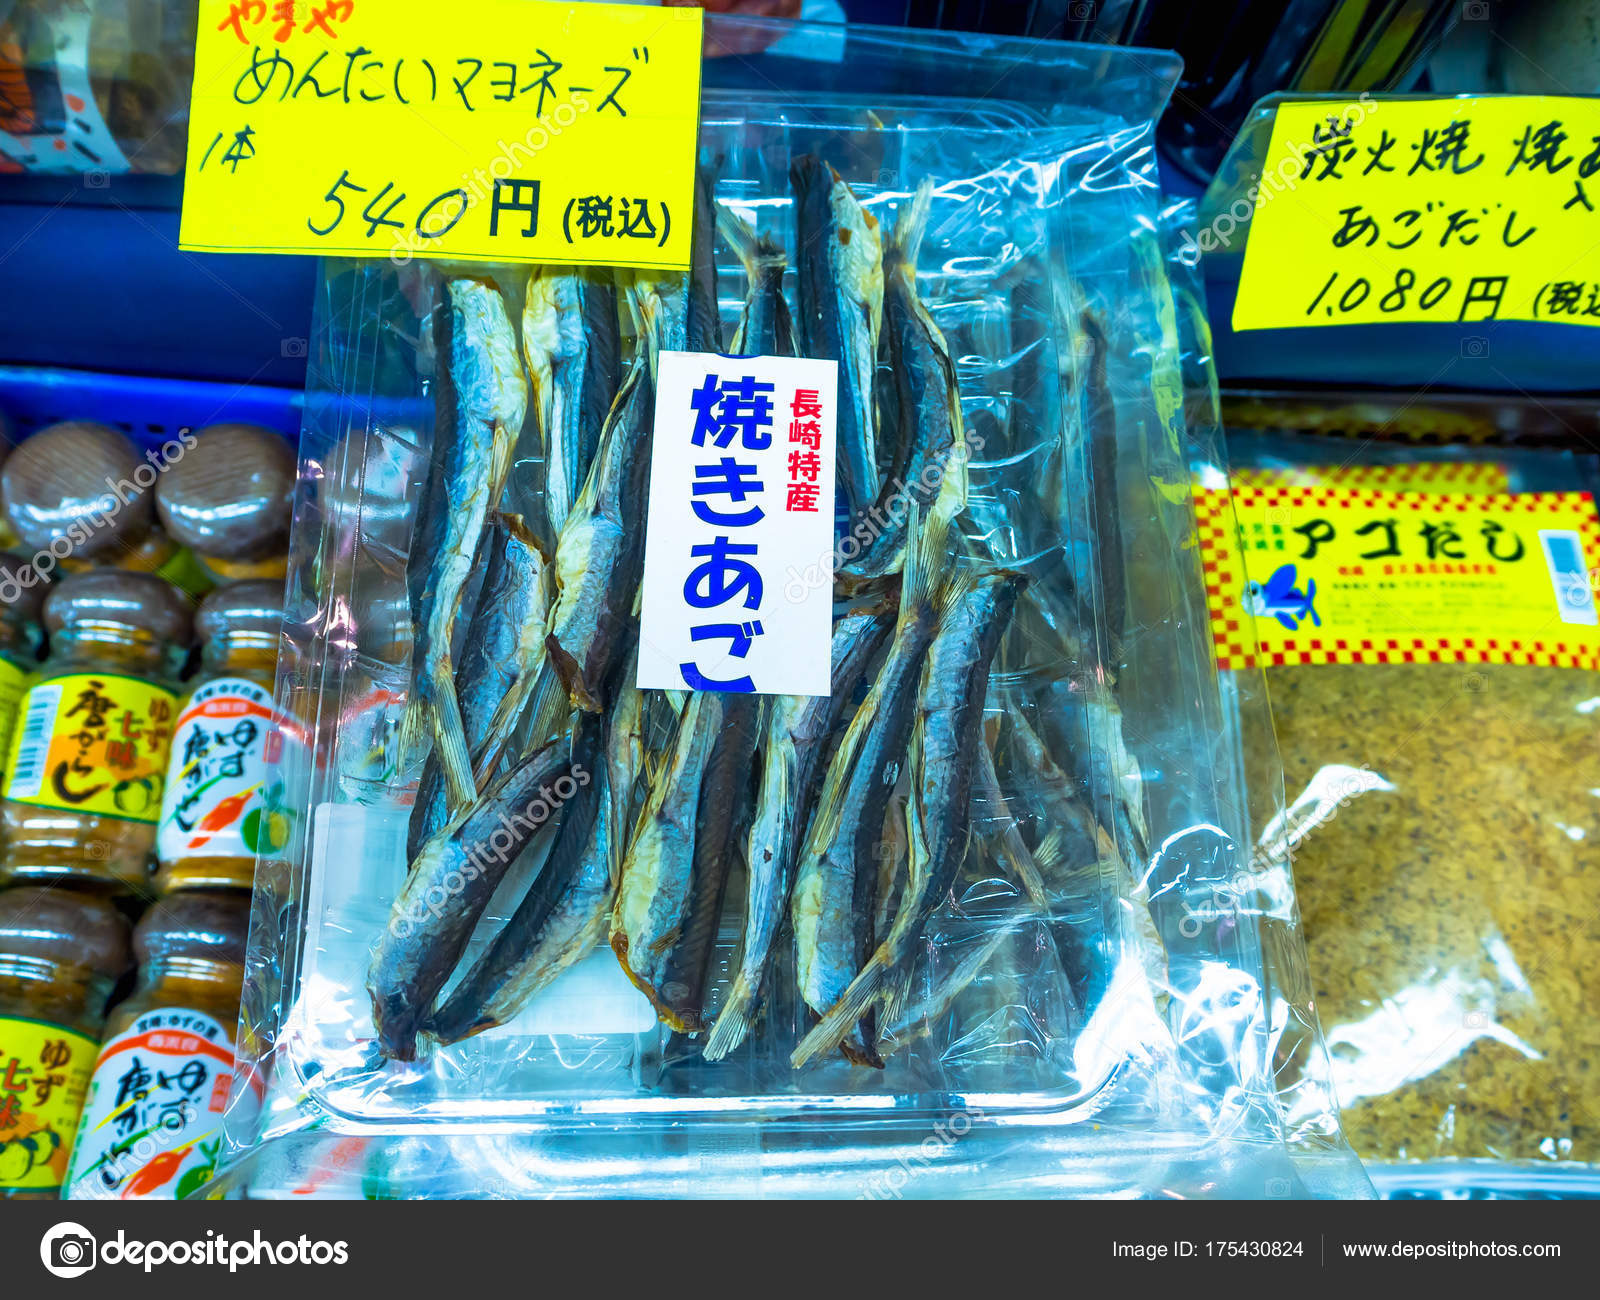 Download Otaru Japan 26 Jun 2017 Dry Fish Inside Of A Plastic Bag And Acomodated Ready To Sell On The Northern Island Of Hokkaido In Japan Stock Editorial Photo C Pxhidalgo 175430824 Yellowimages Mockups